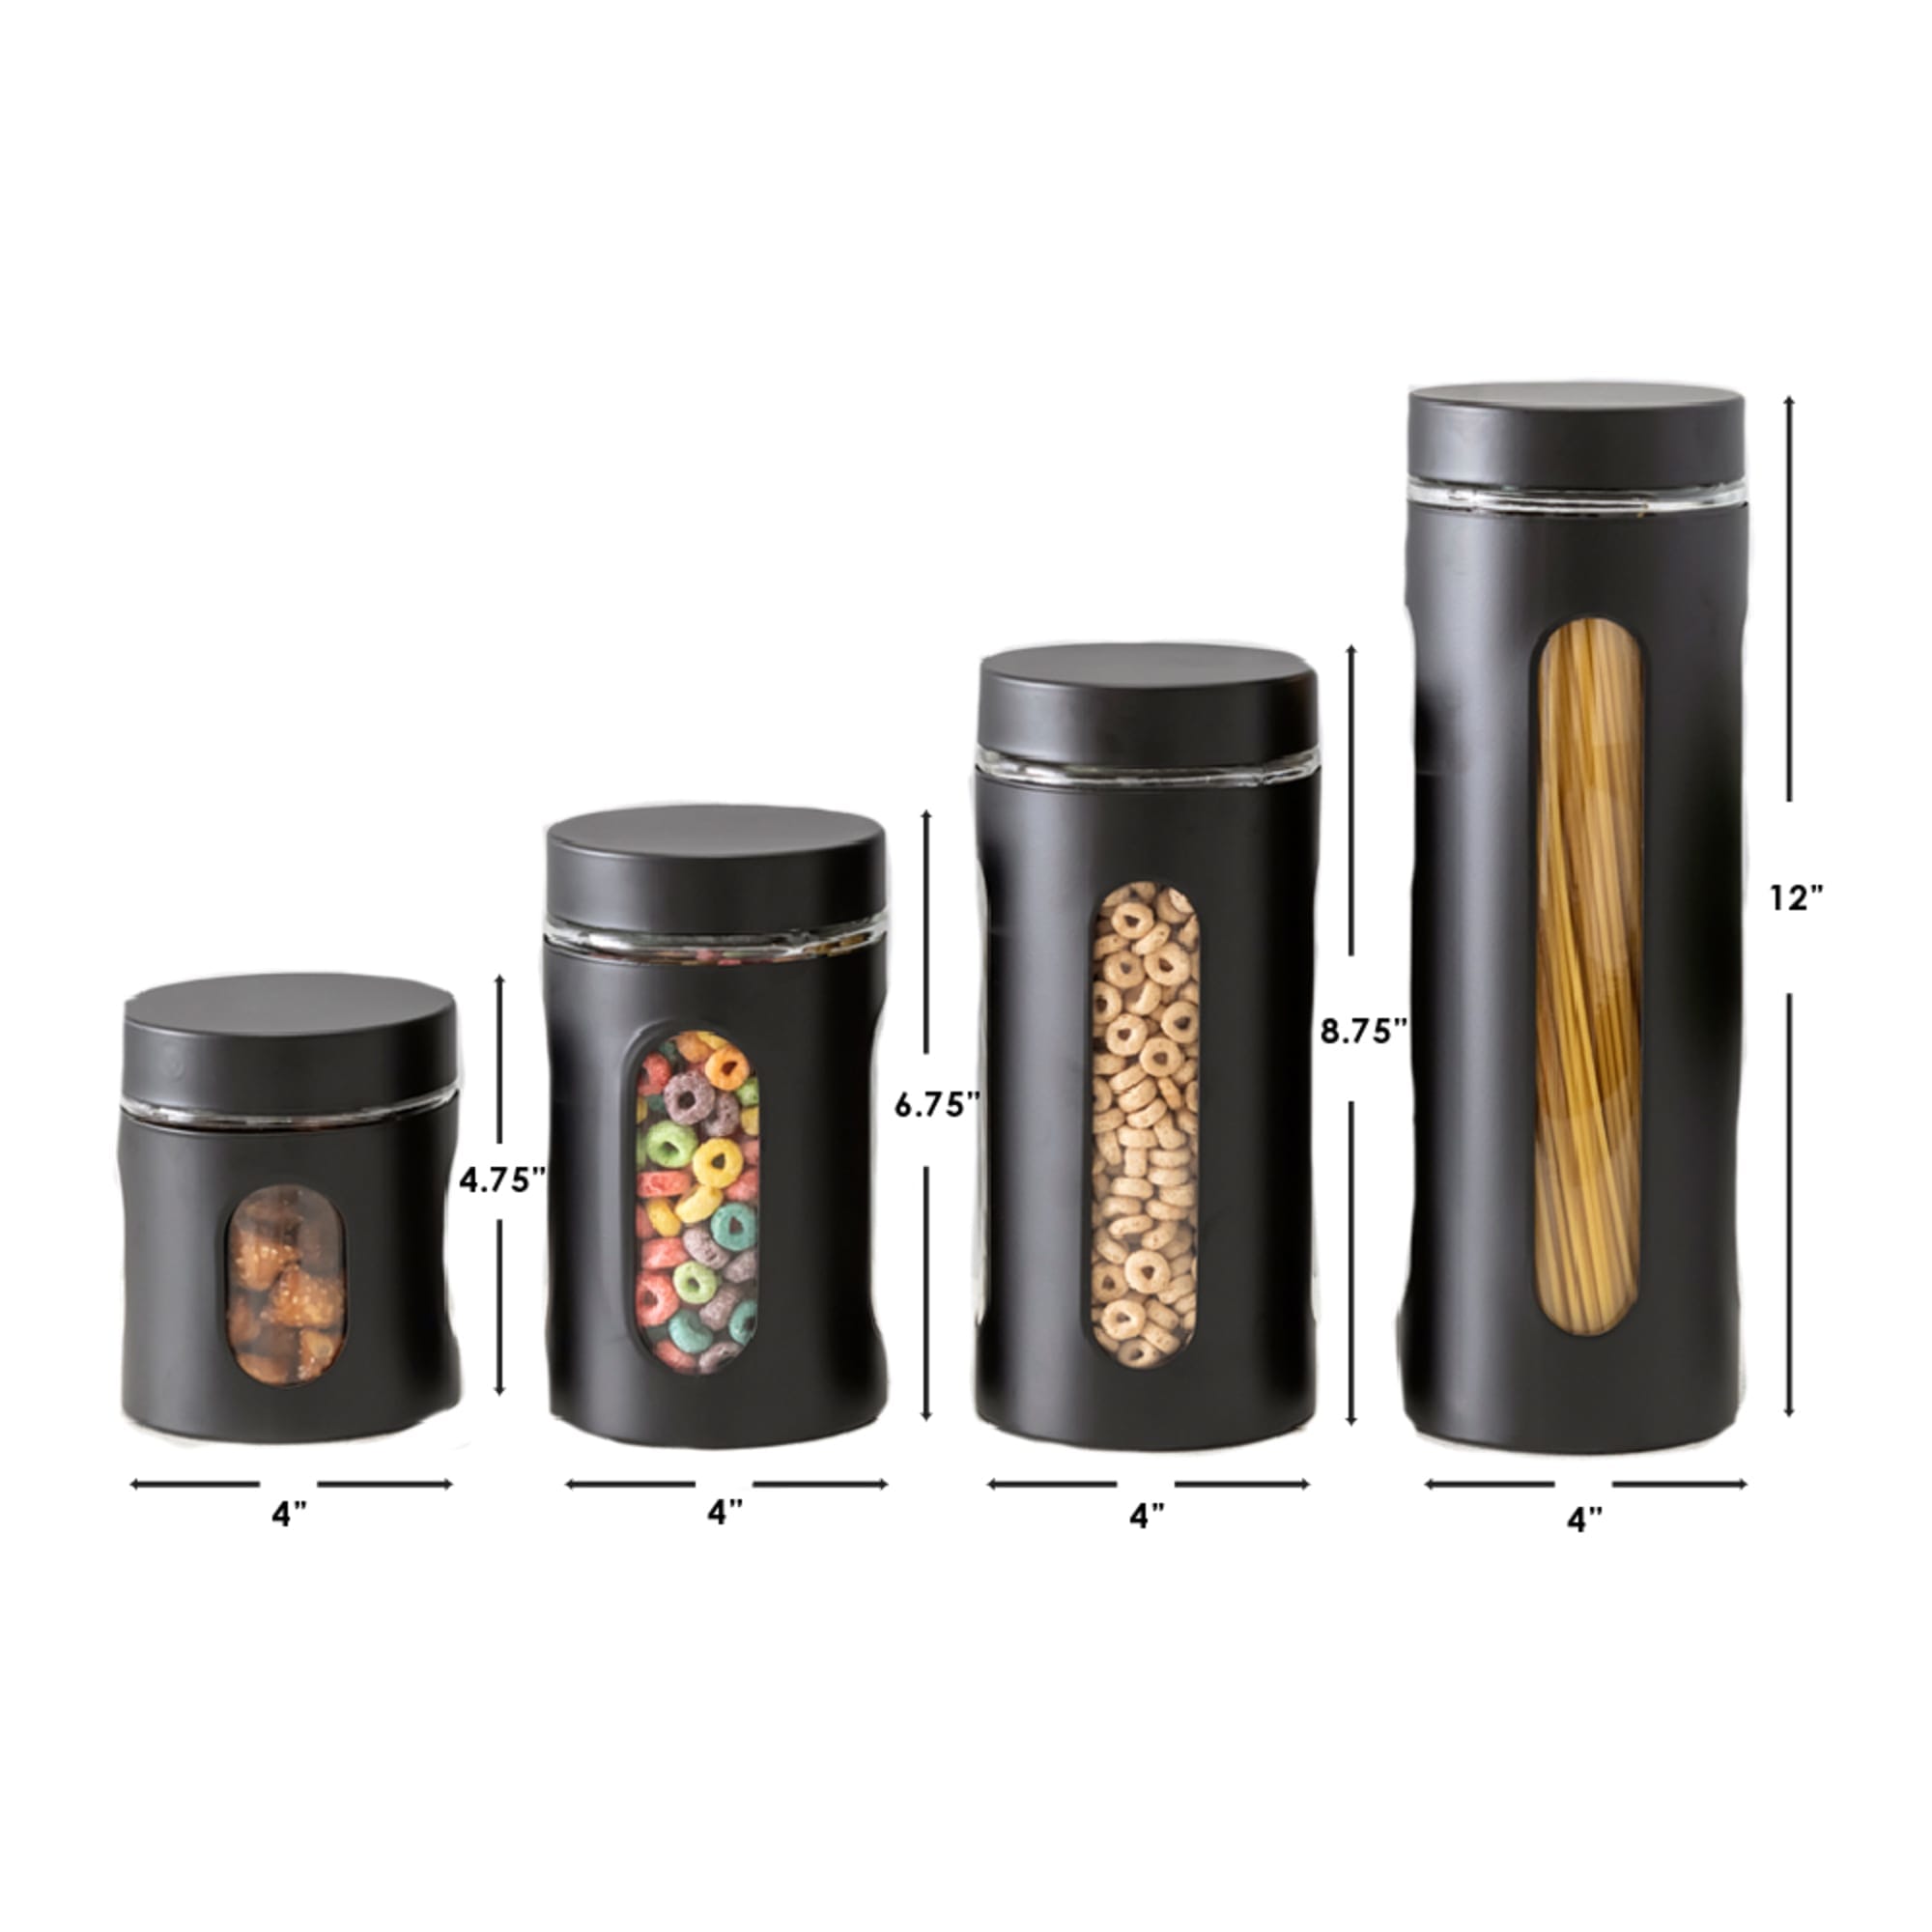 Home Basics 4 Piece Metal Canisters with Multiple Peek-Through Windows, Black $12.00 EACH, CASE PACK OF 4